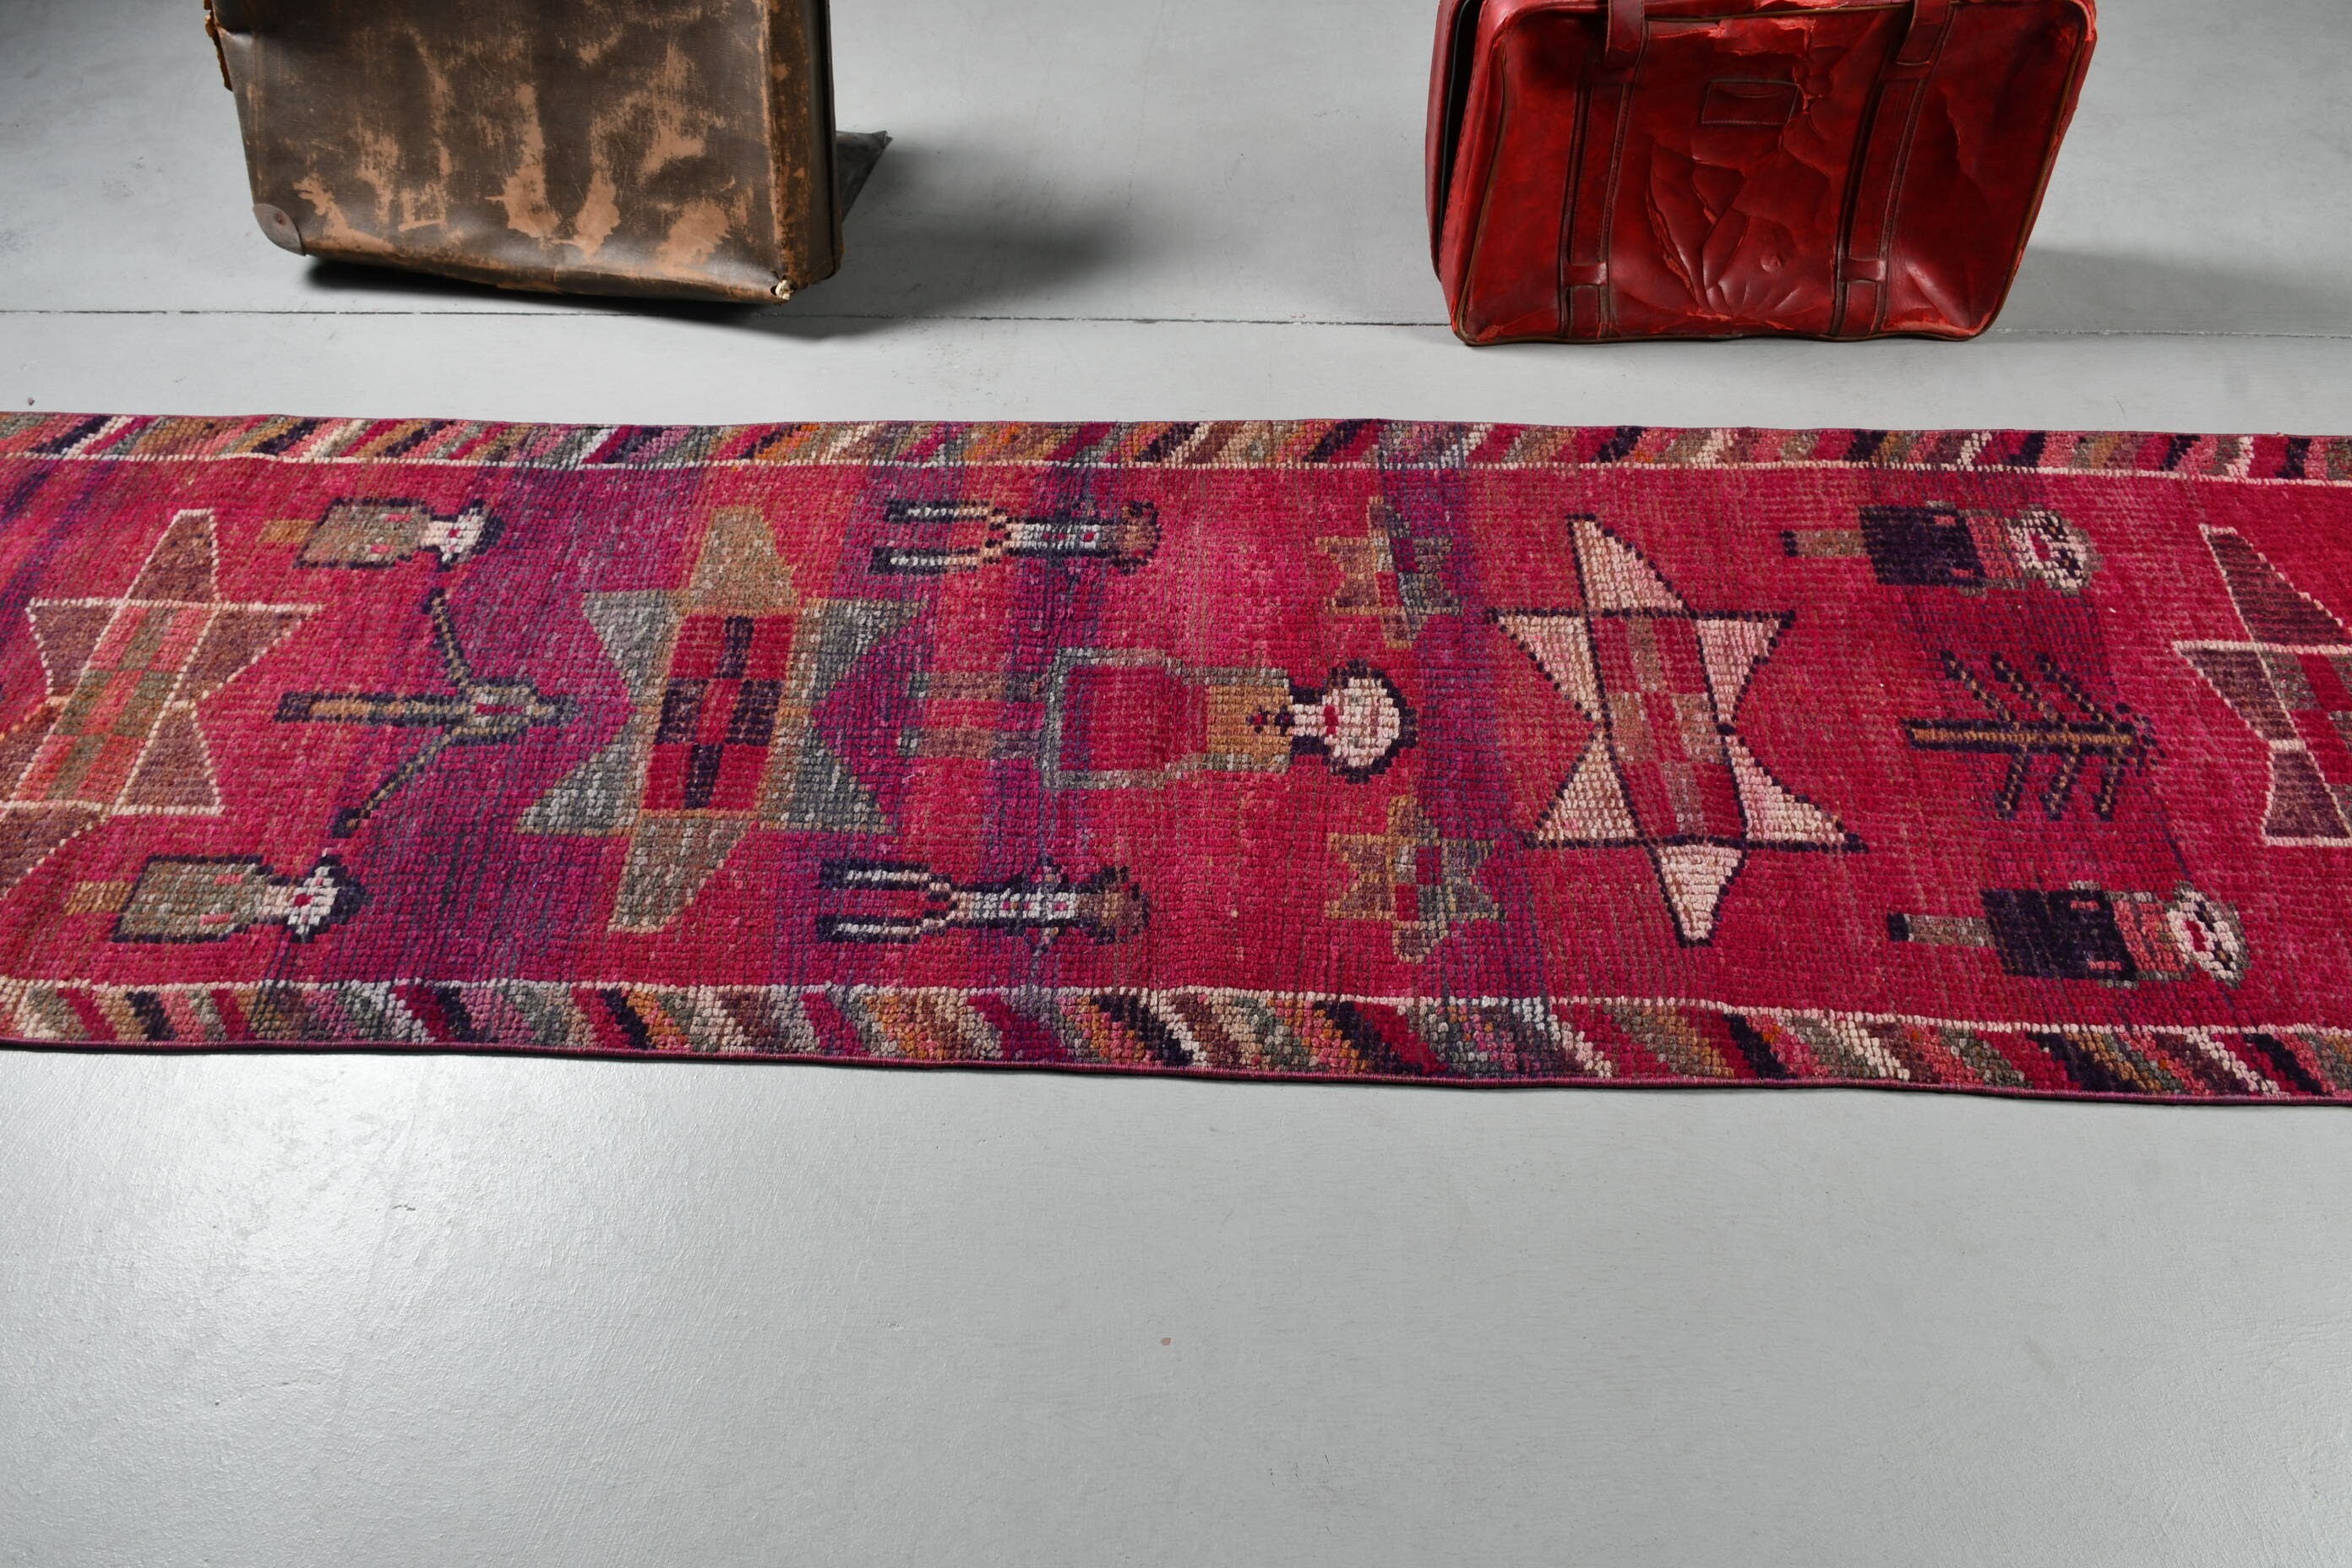 Rugs for Corridor, 2.8x9.2 ft Runner Rug, Retro Rug, Kitchen Rug, Home Decor Rug, Red Anatolian Rugs, Turkish Rug, Stair Rugs, Vintage Rugs